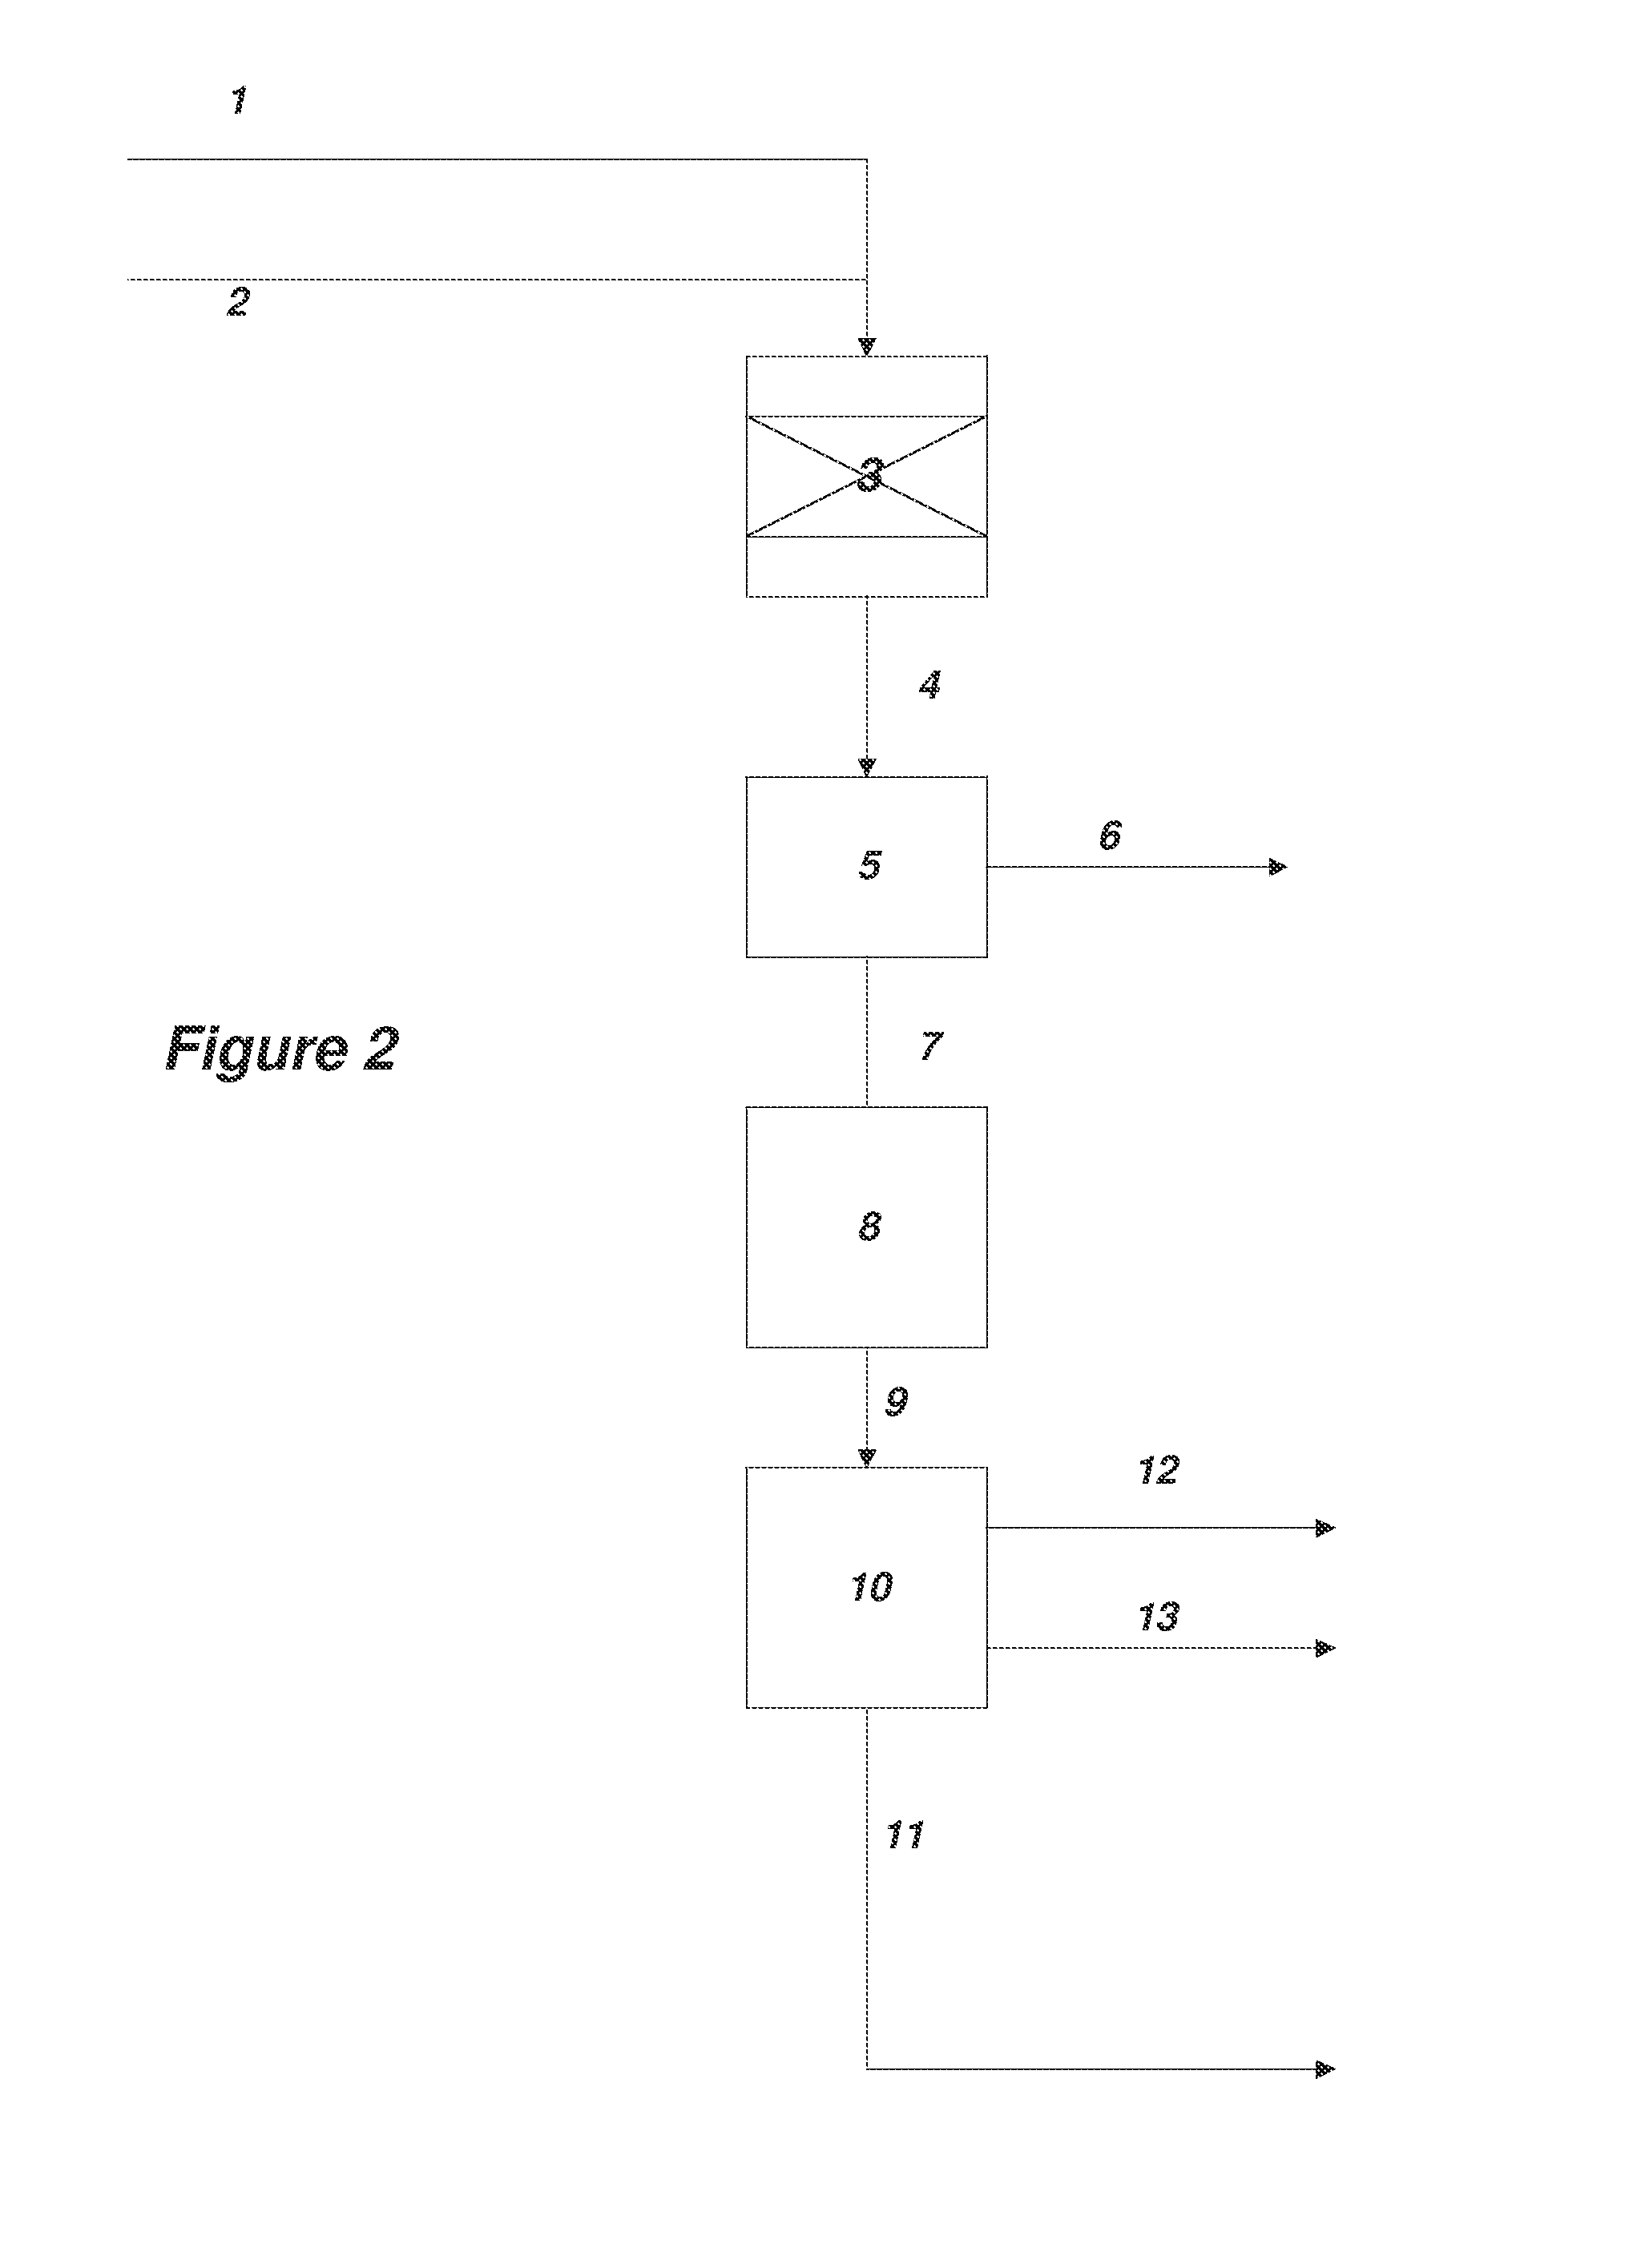 Process for production of acrylates from epoxides